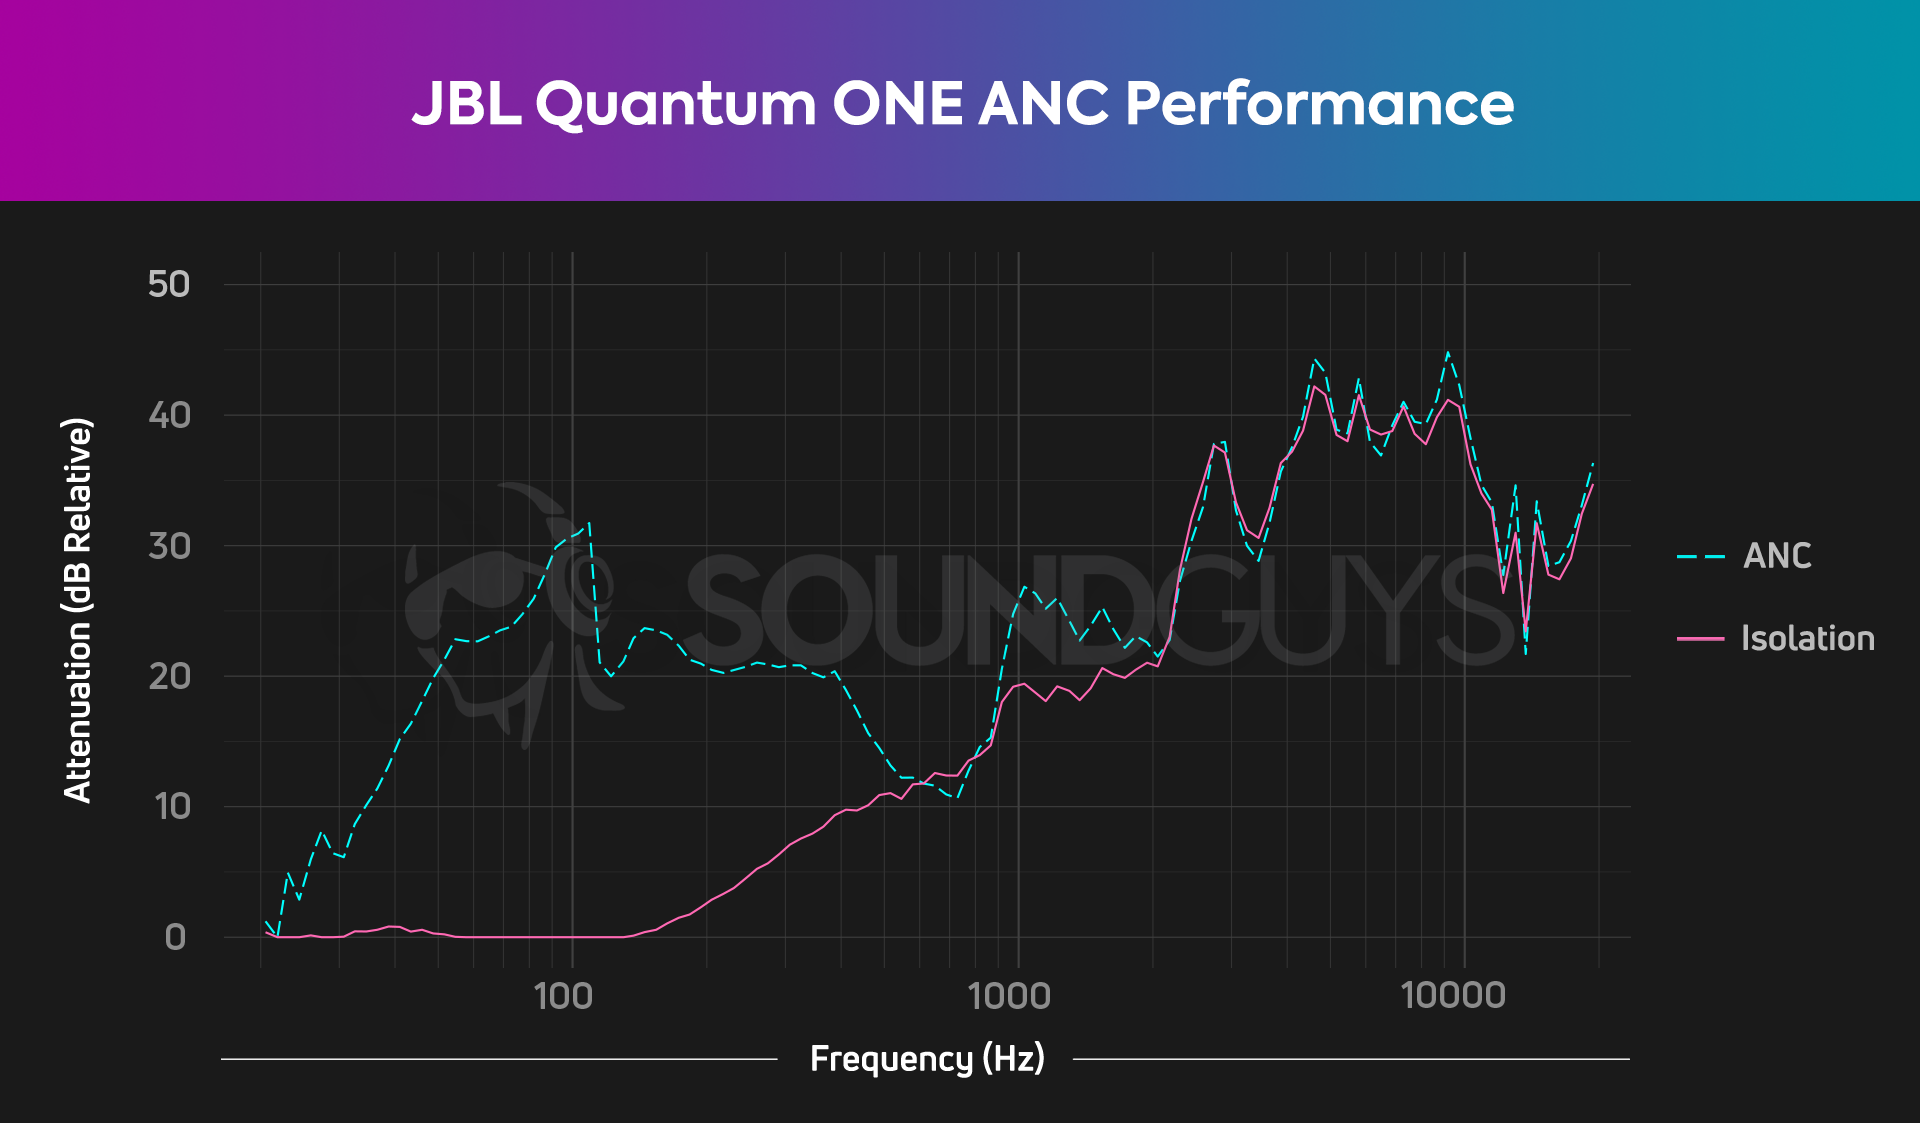 JBL Quantum One isolation and active noise canceling chart showing impressive ANC performance.